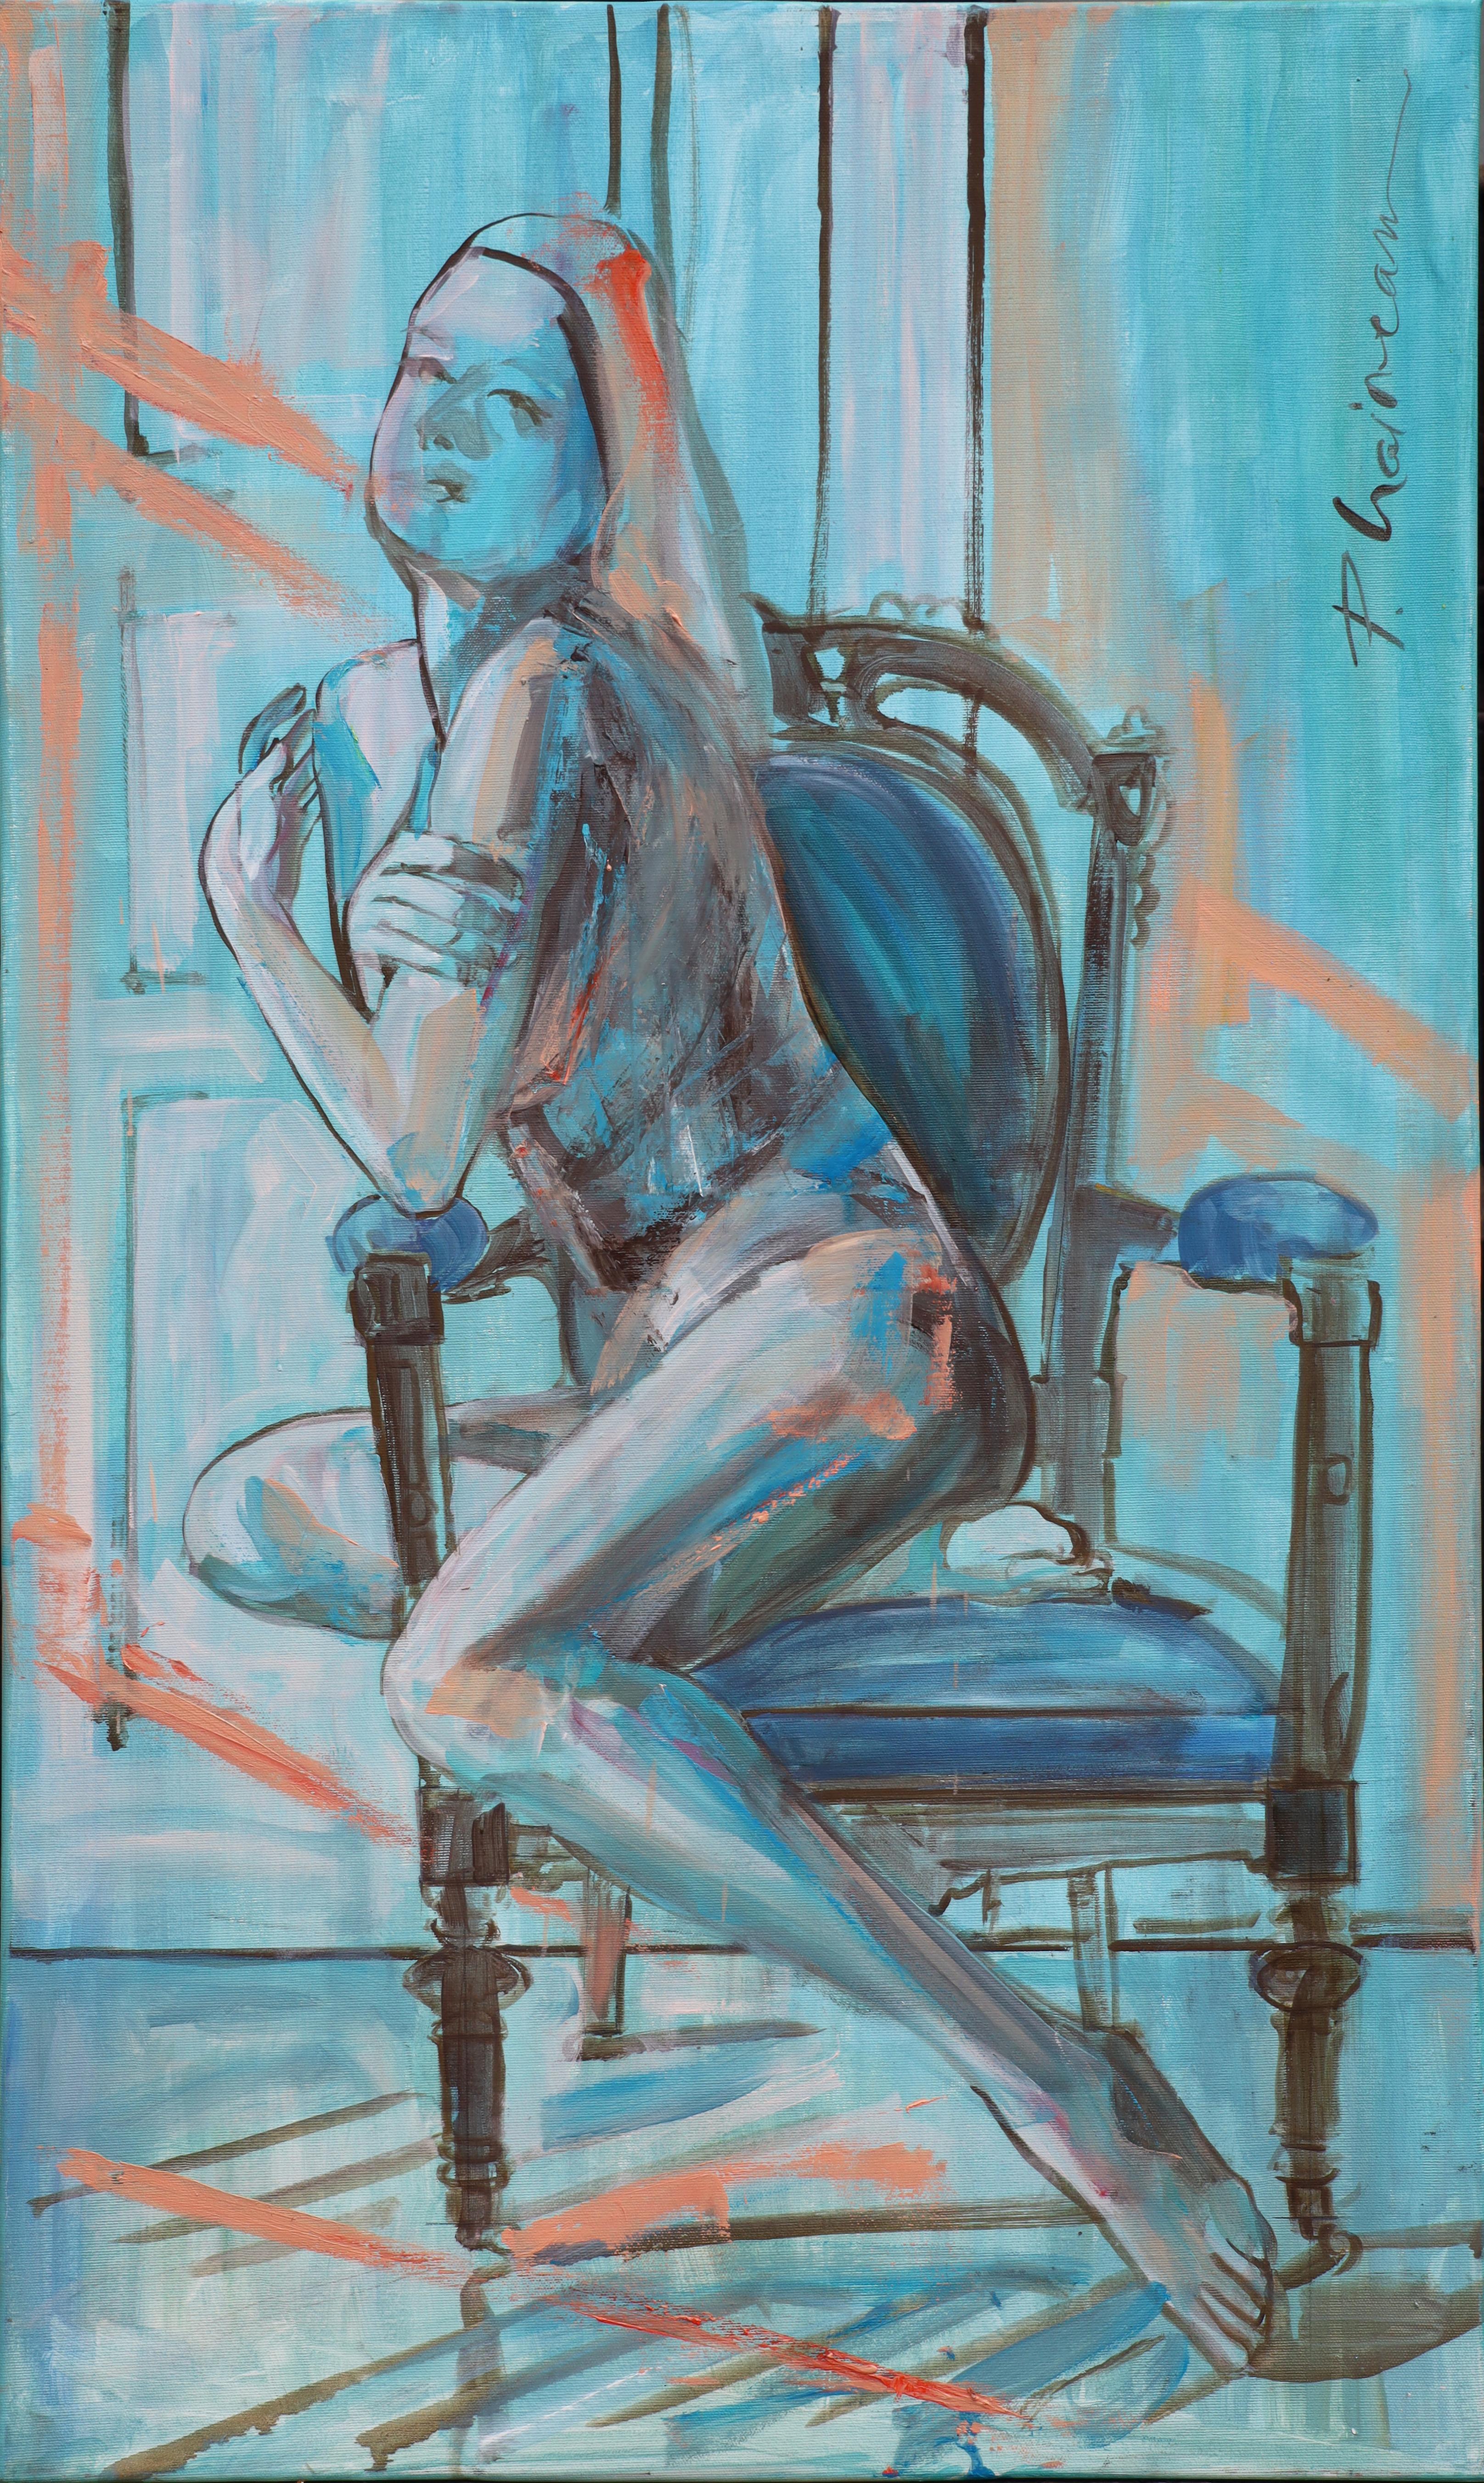 Sunrise (Nude on Armchair 4)
Part of my "Nude in Interior" series and part of Mixed Moods solo show, until September 29.
Original painting.  size 39x23in / 100x60cm .

Shipped stretched, as it is, ready for hanging from Florida, US.

Painting was